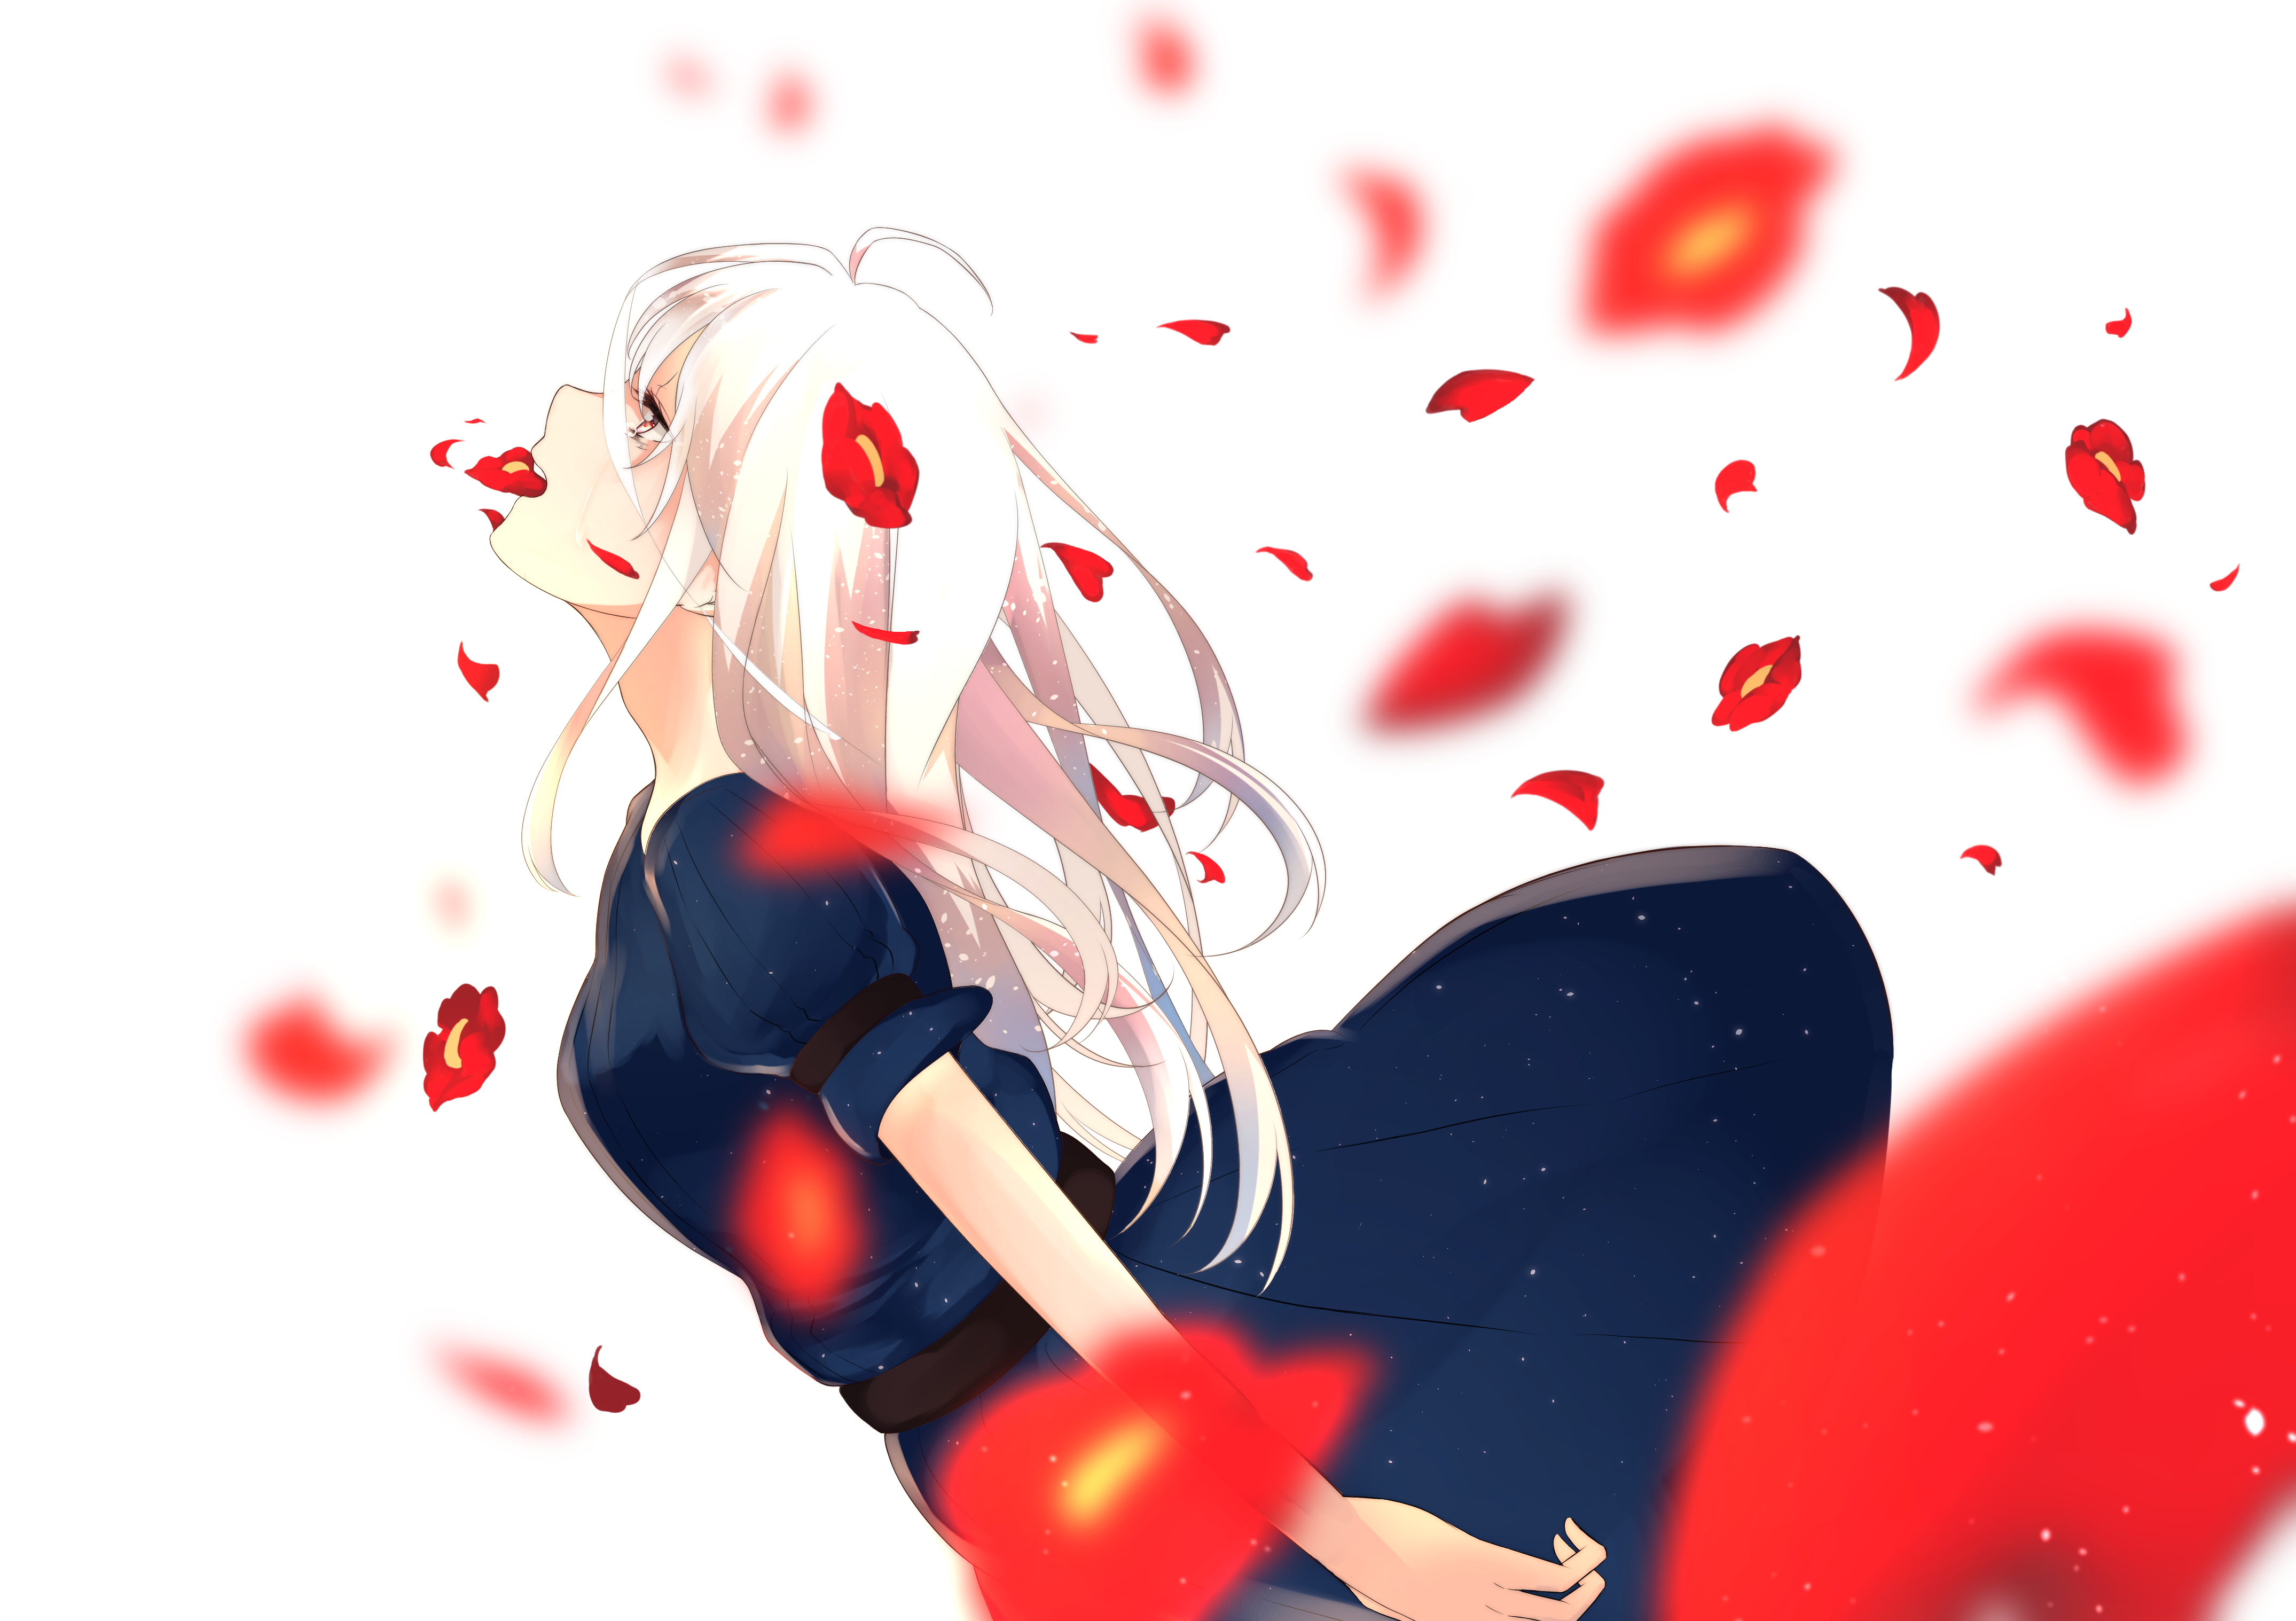 Anime Anime Girls White Background White Hair Long Hair Flowers Petals Falling Red Eyes Red Flowers 4299x3035